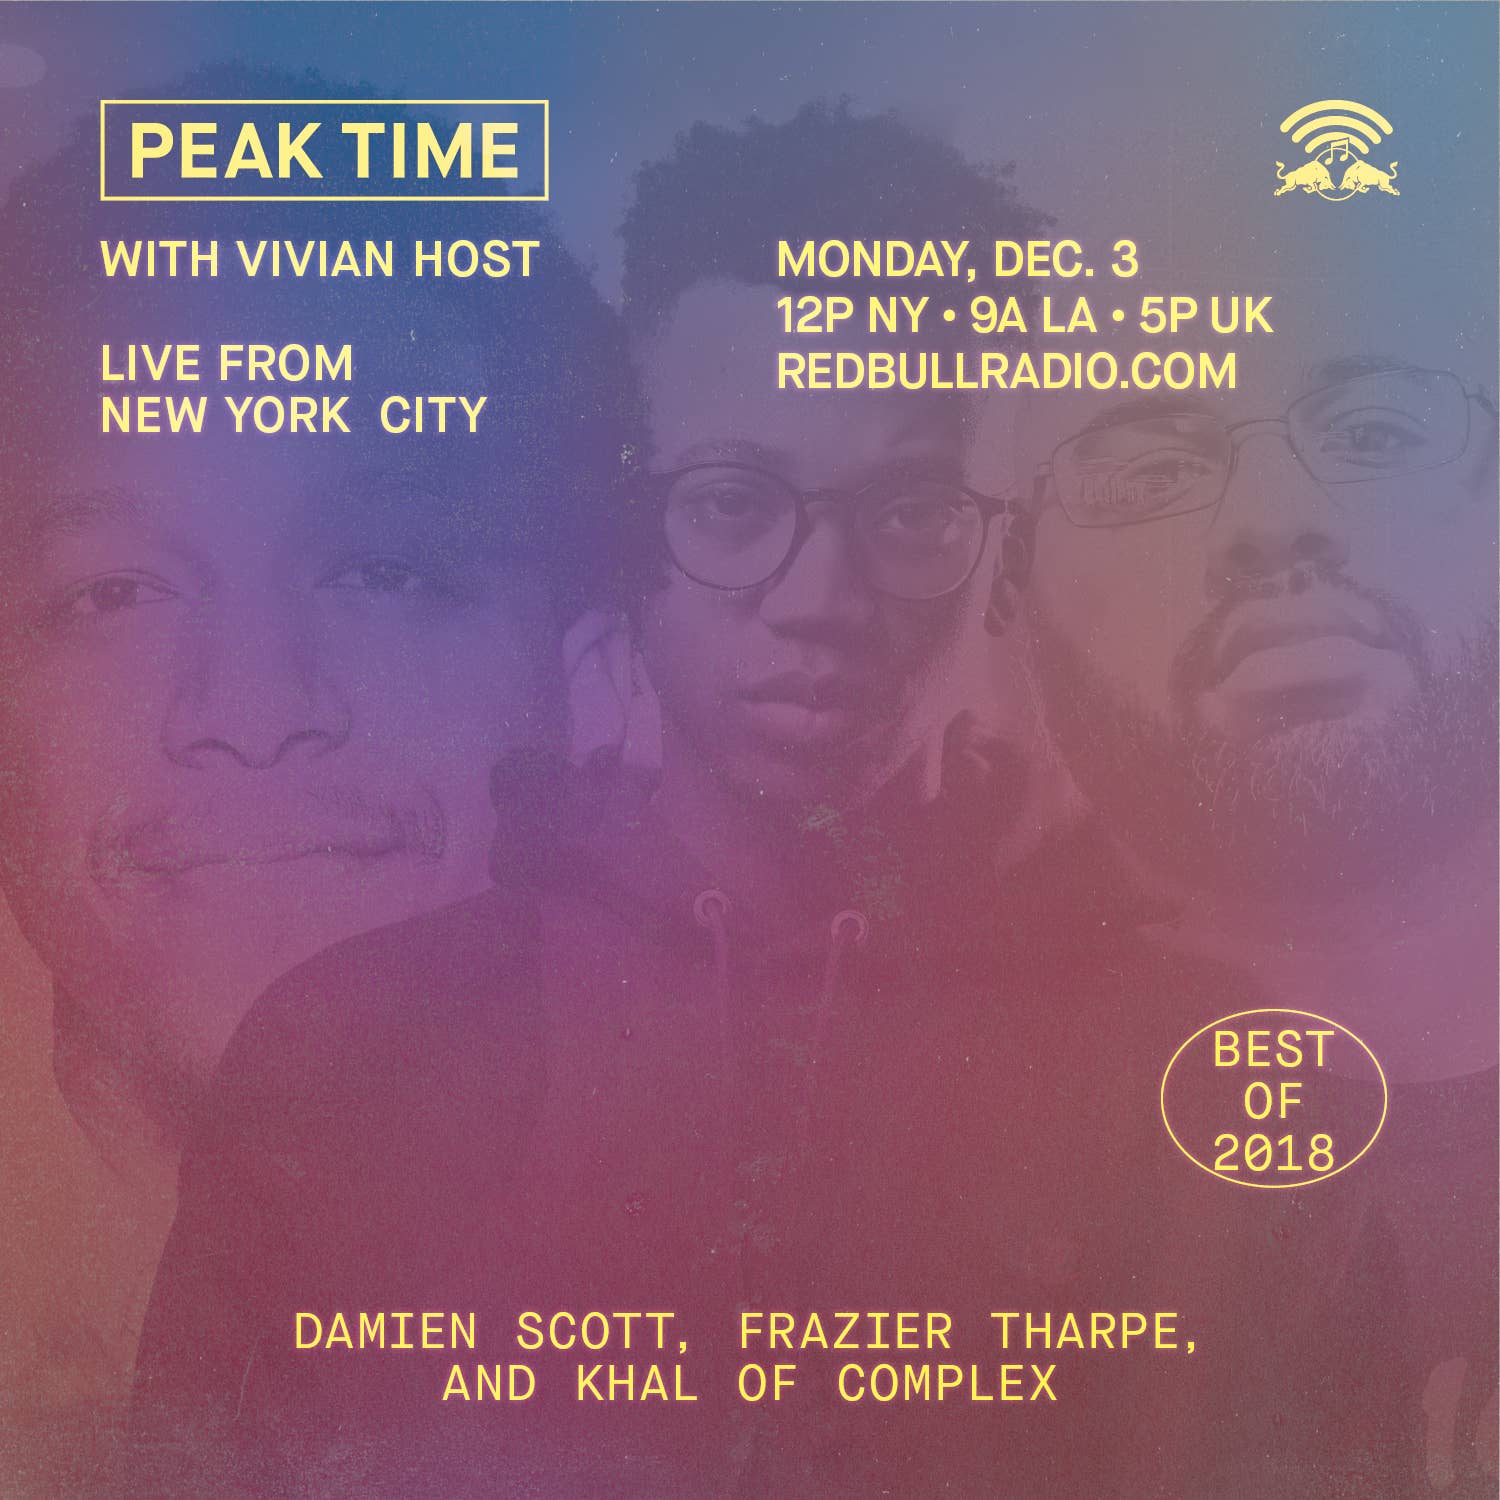 Complex on Peak Time with Vivian Host, Best of 2018